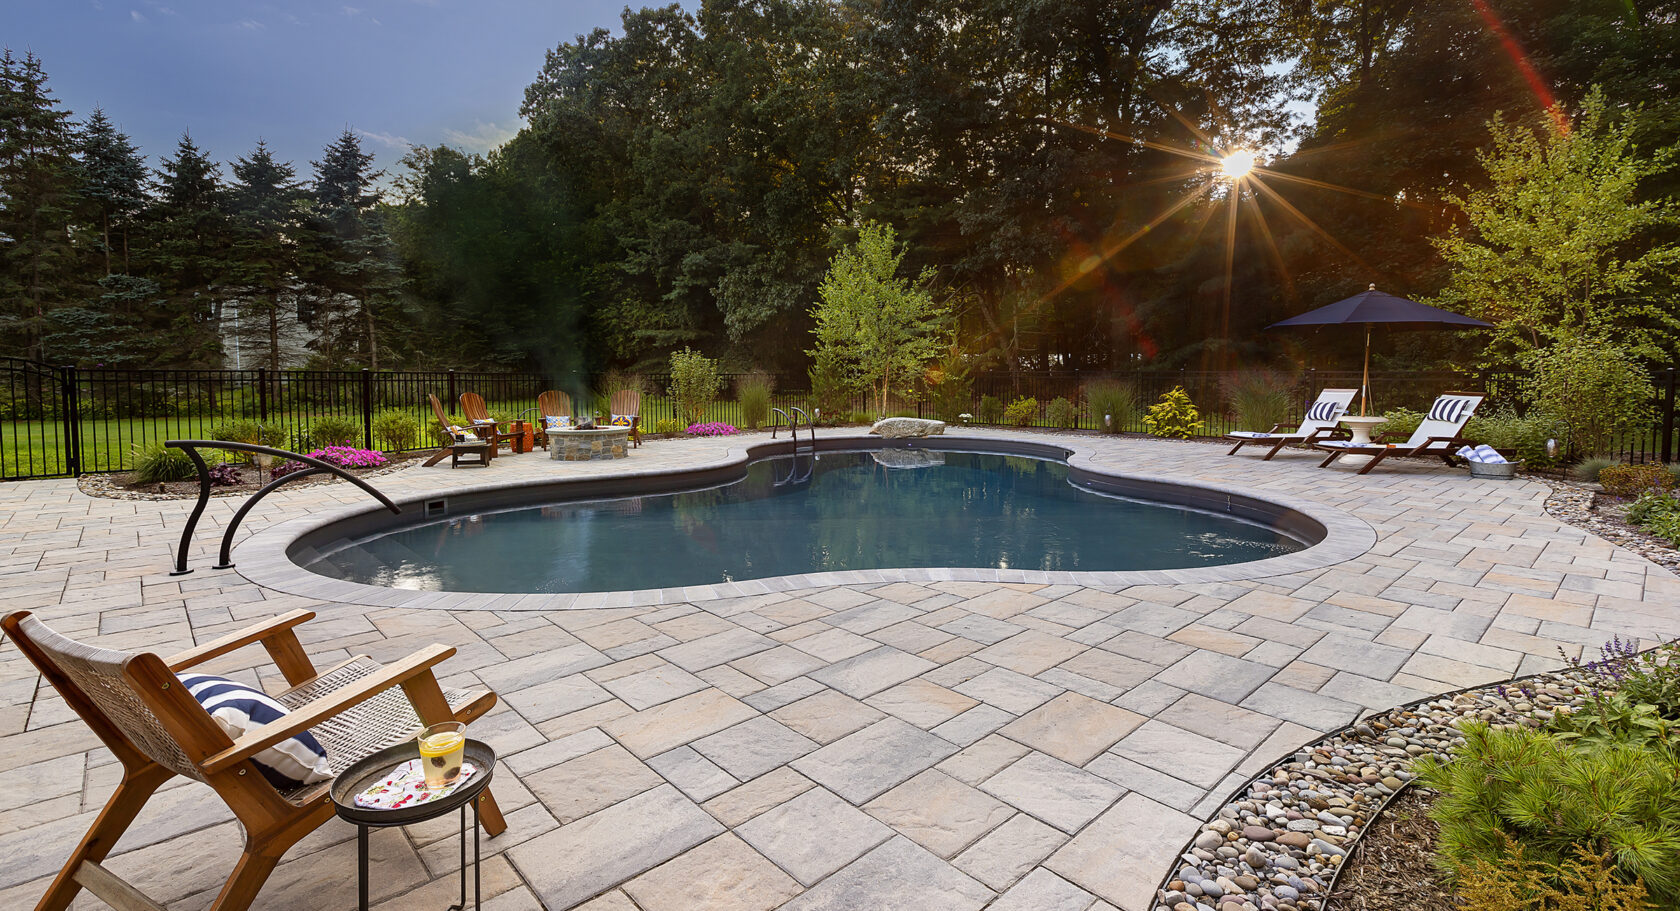 Pool chair overlooks inground pool with sunset through the trees. Paver pool deck design-build by Dex by Terra.